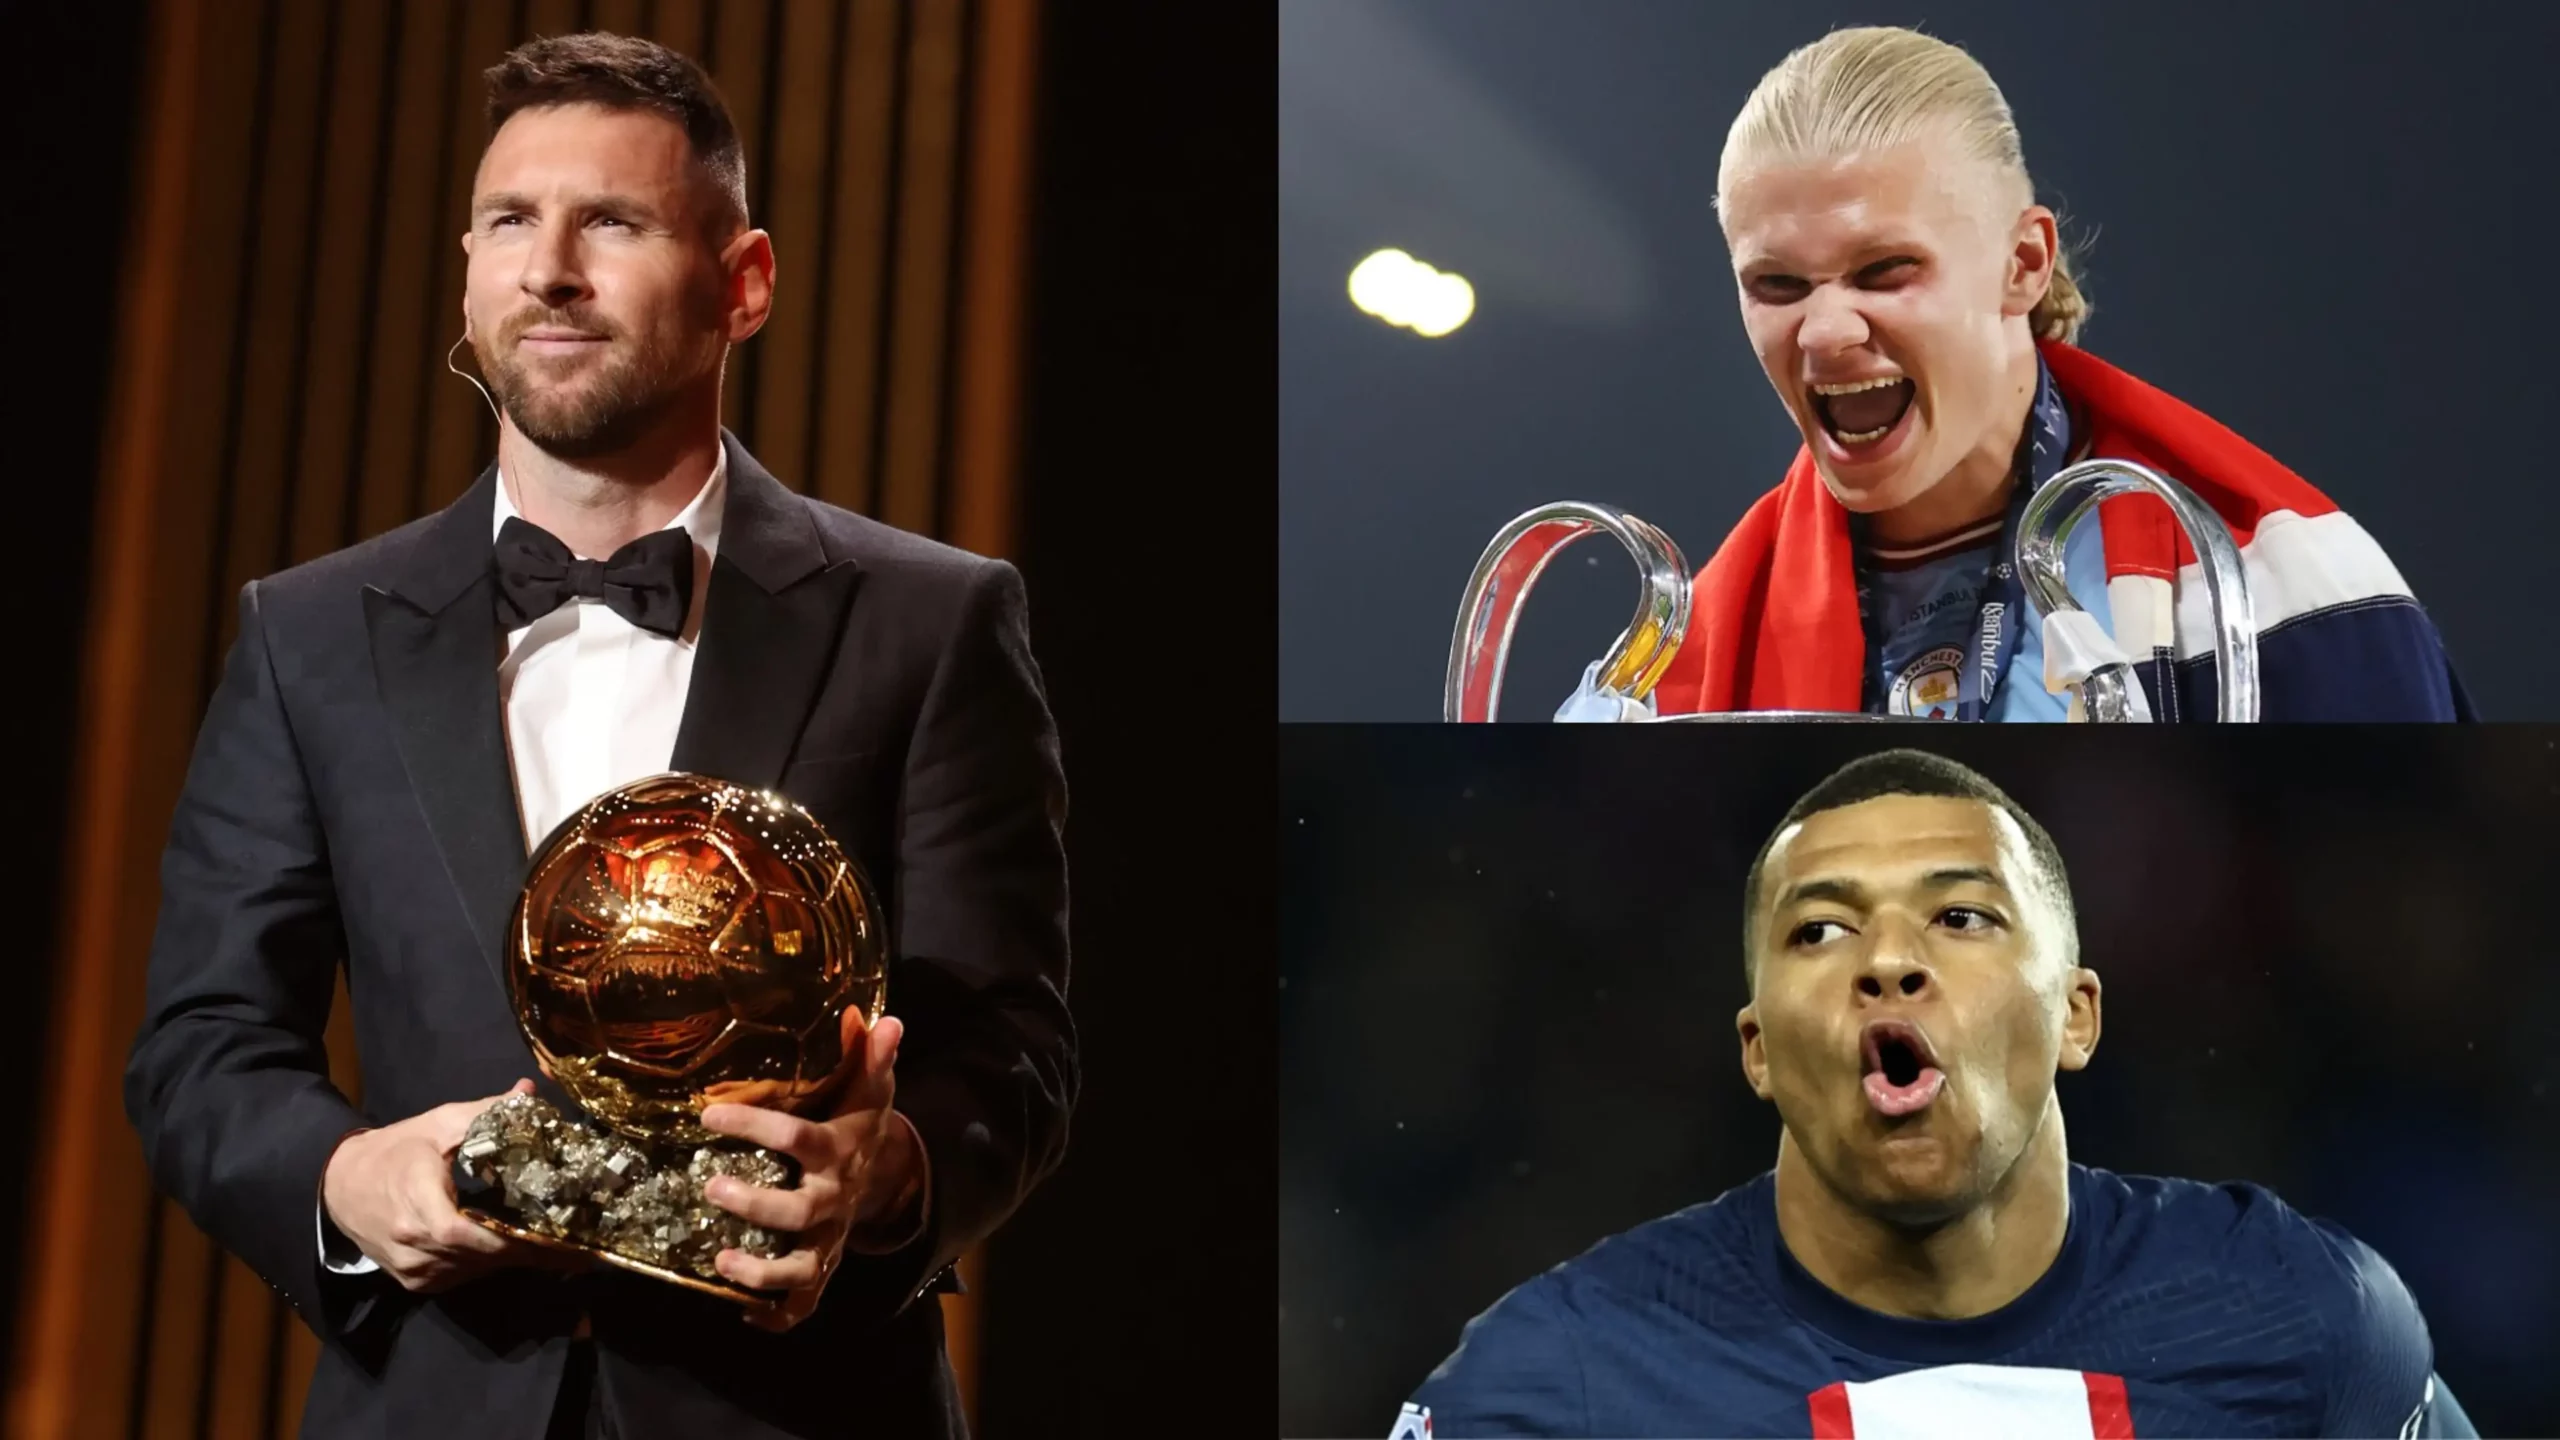 You will win Ballon d’Or Messi tells Haaland, Mbappe after claiming eighth award